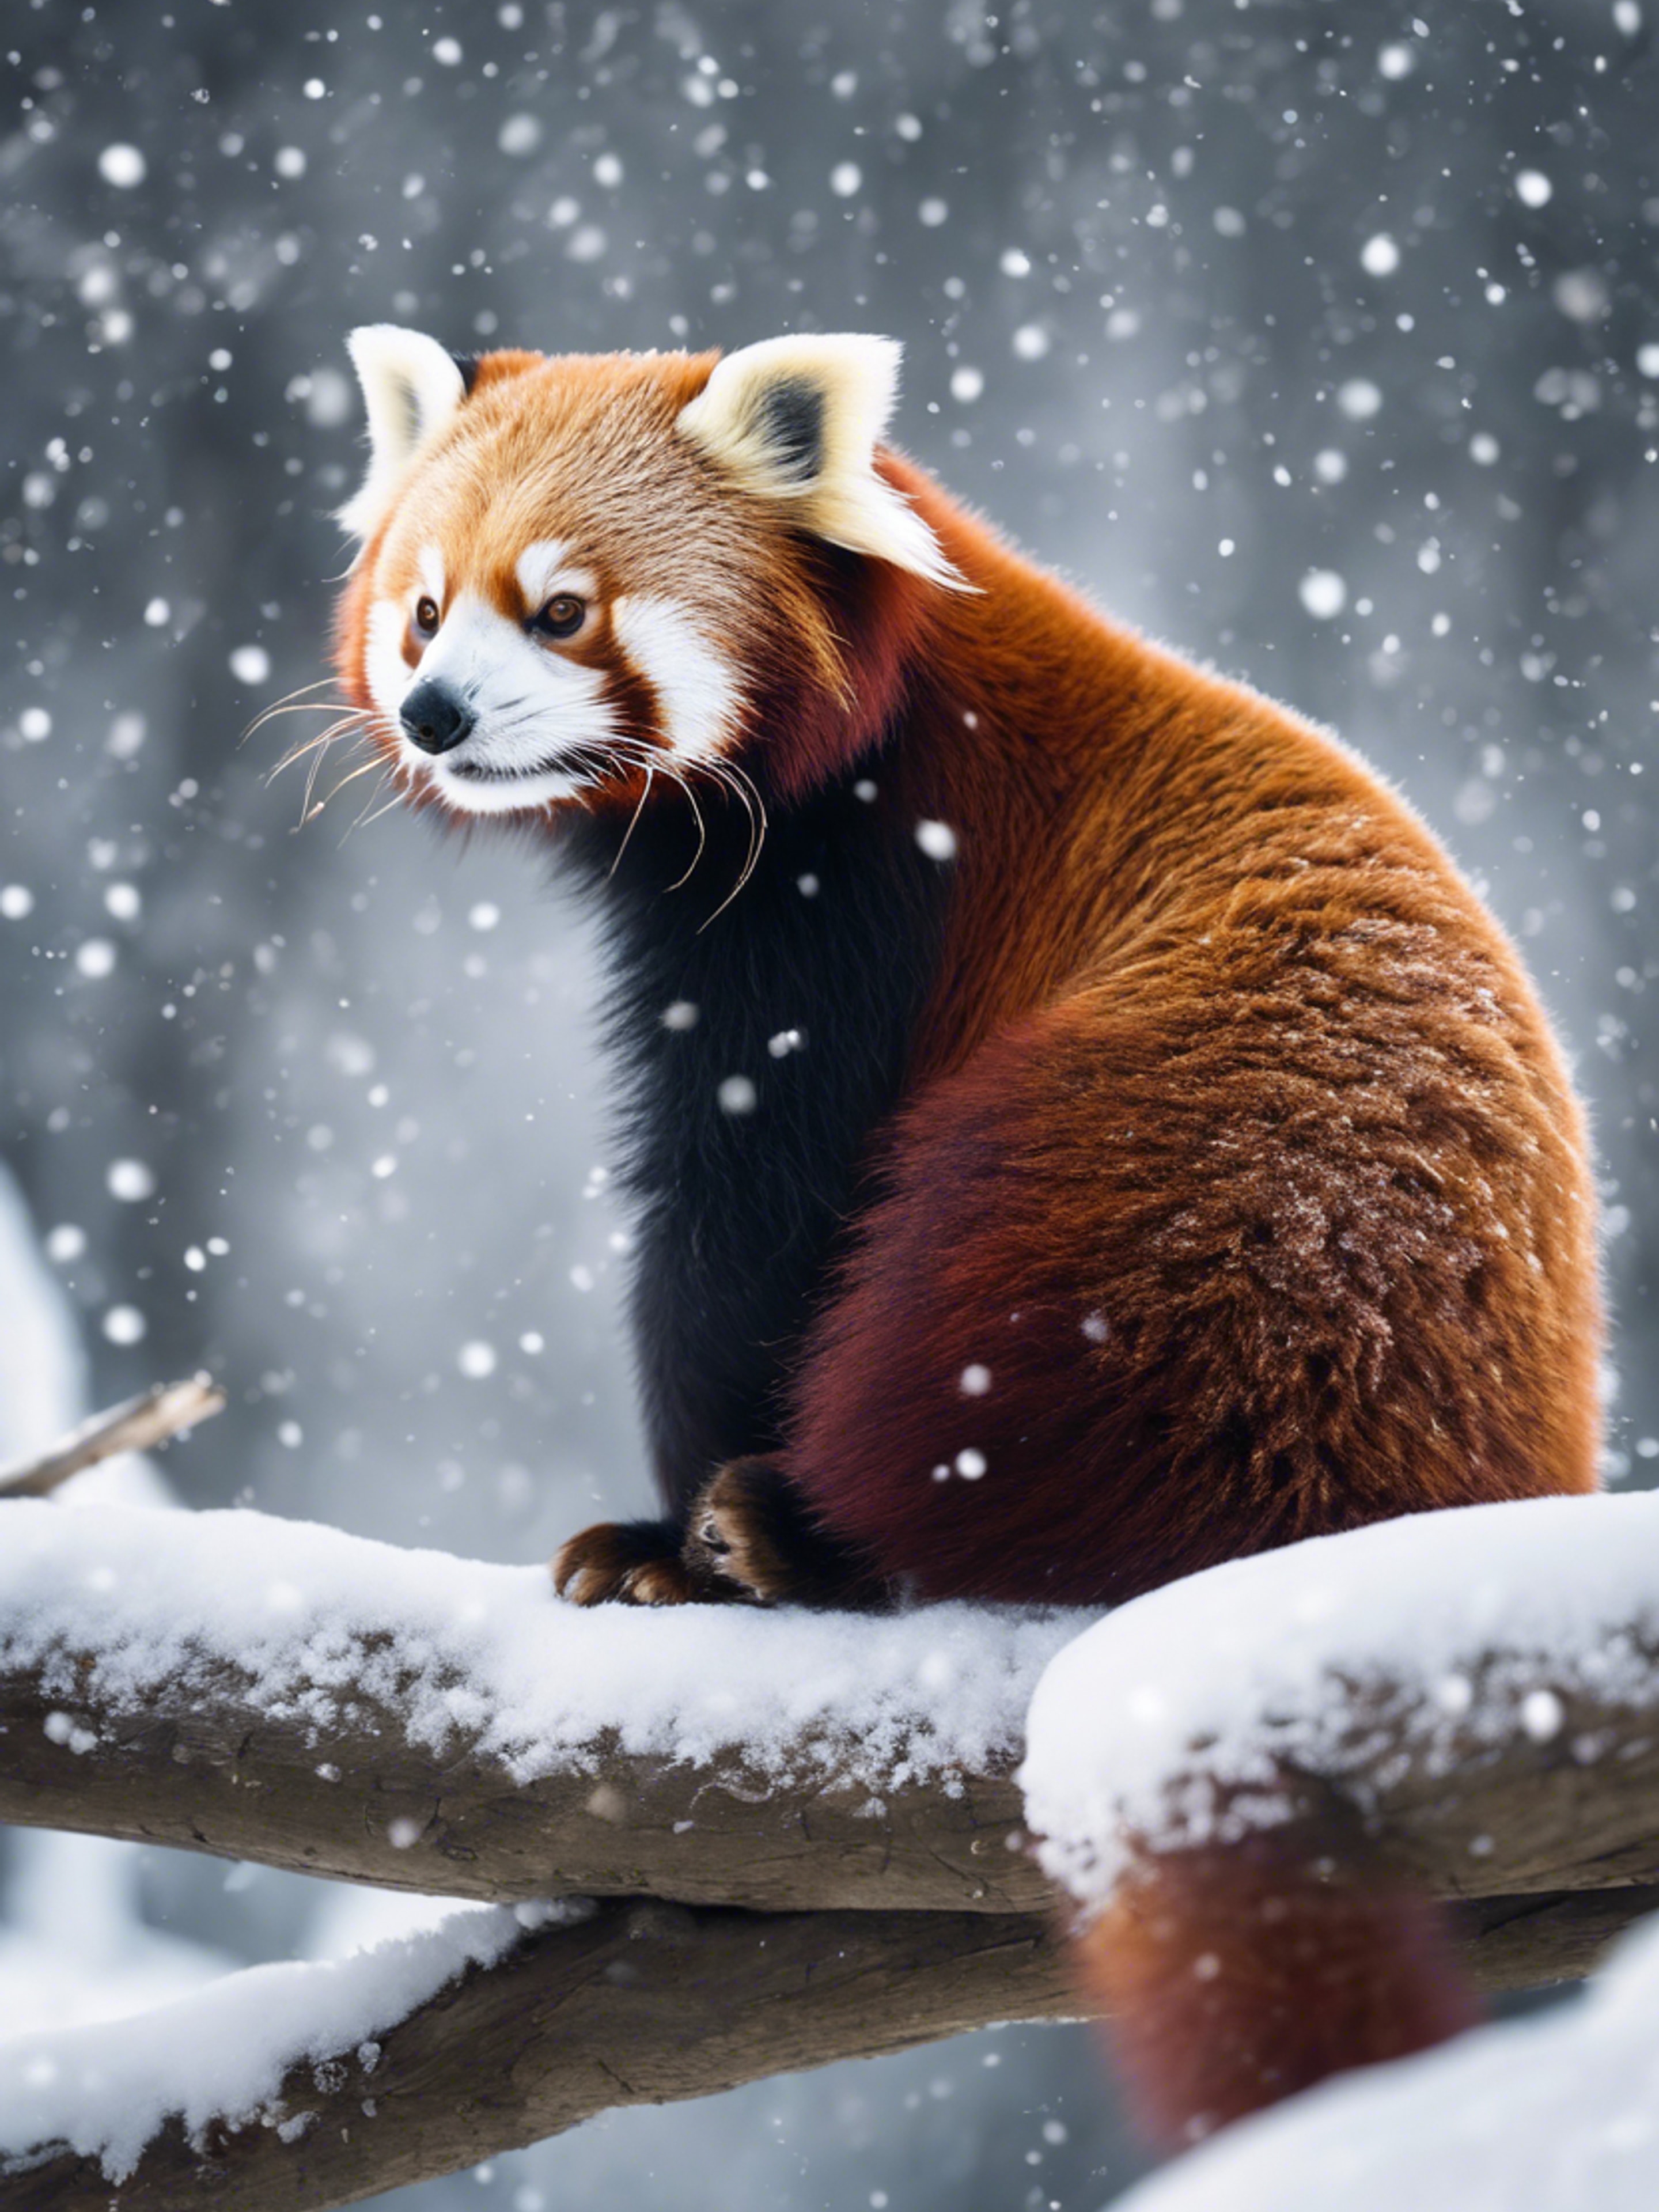 A red panda in winter, its fur looking extra striking against the snow. 墙纸[00977545189243e2b3f0]